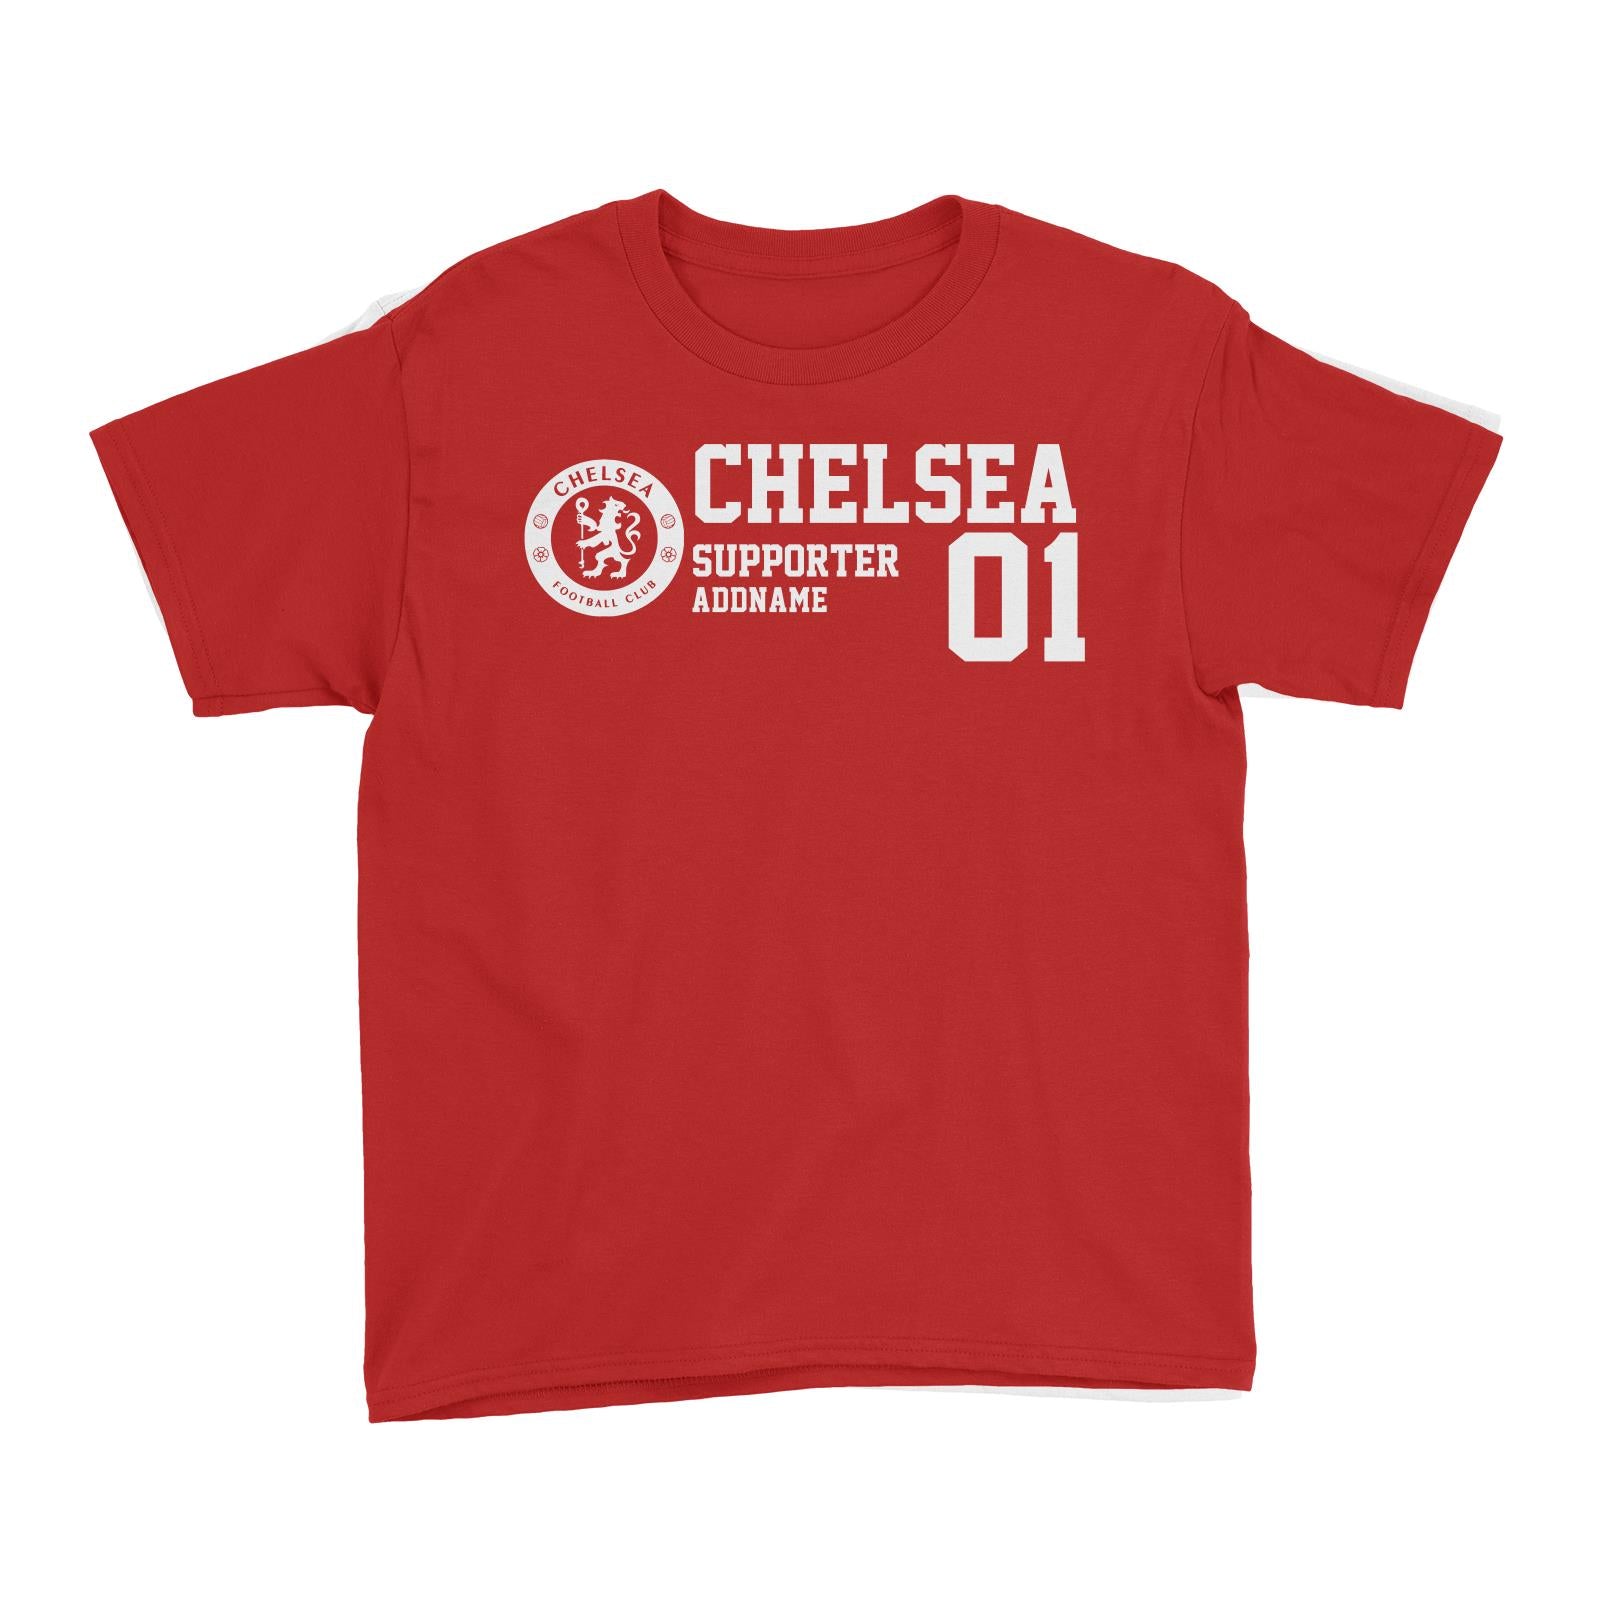 Chelsea Football Keep Supporter Addname Kid's T-Shirt